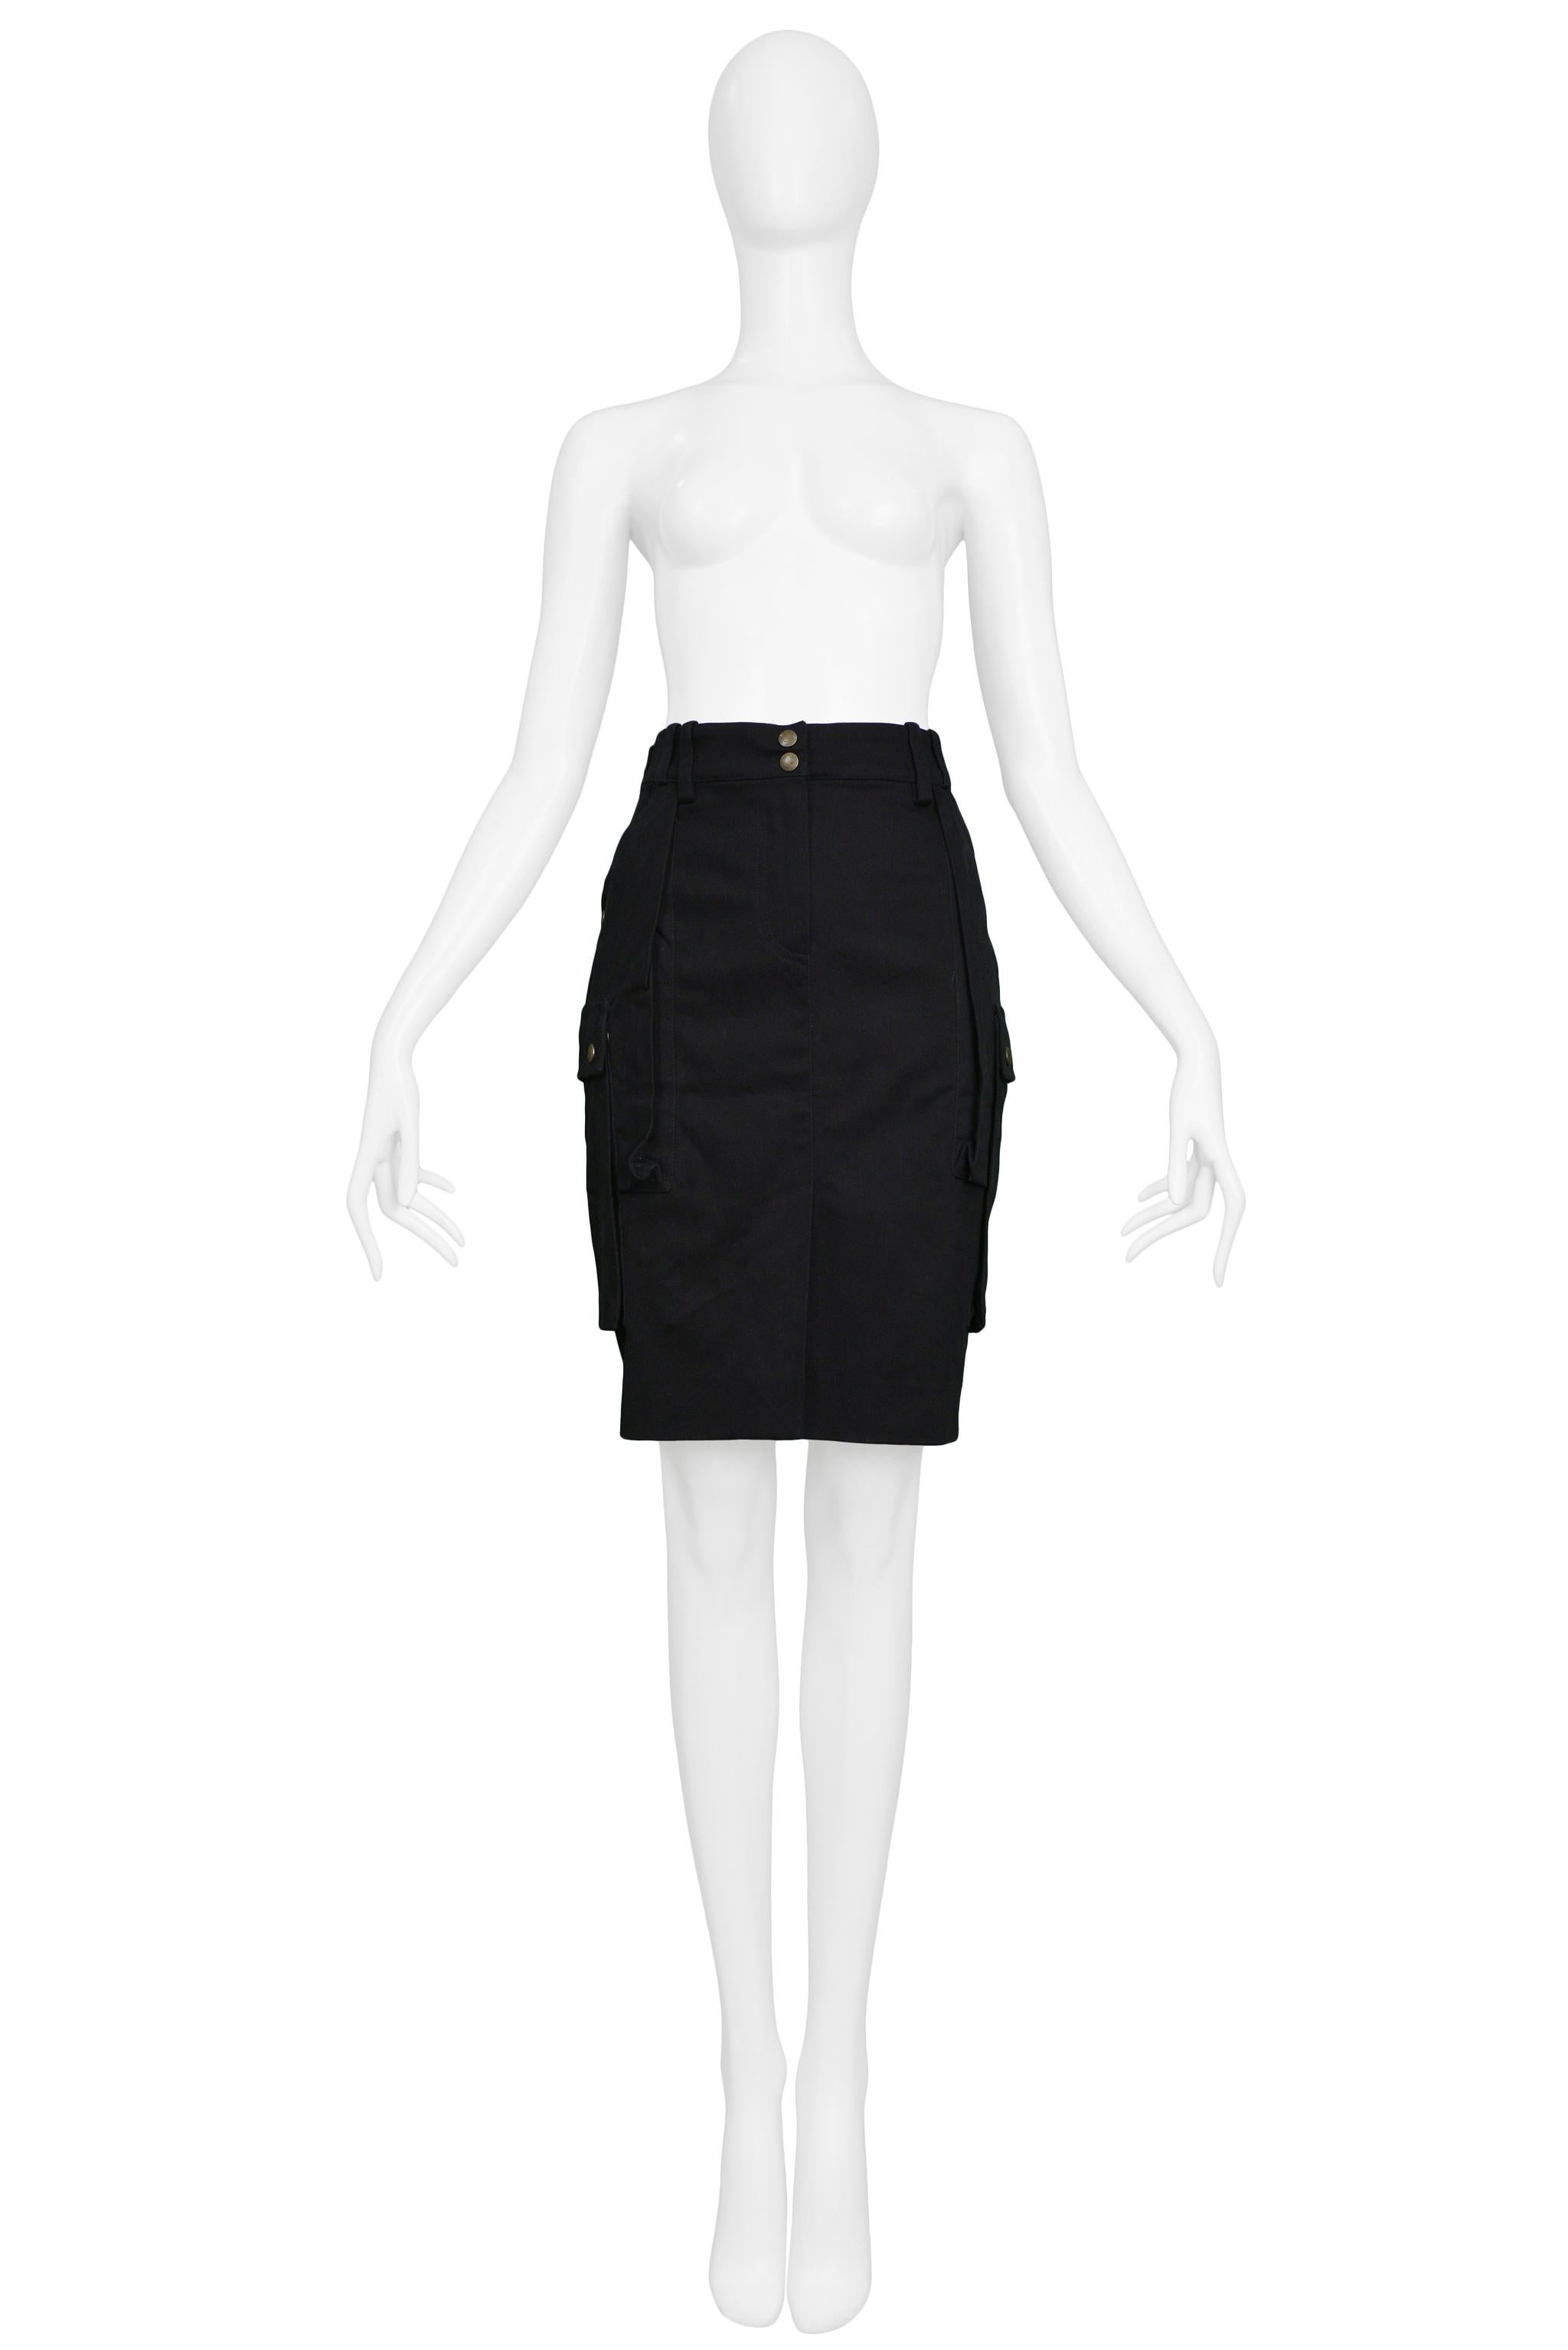 Resurrection Vintage is excited to offer of vintage Balenciaga by Nicolas Ghesquière black fitted cargo skirt featuring a high structured waistband, brass snaps, belt loops, a pencil style silhouette, large side cargo pockets with brass snaps, and